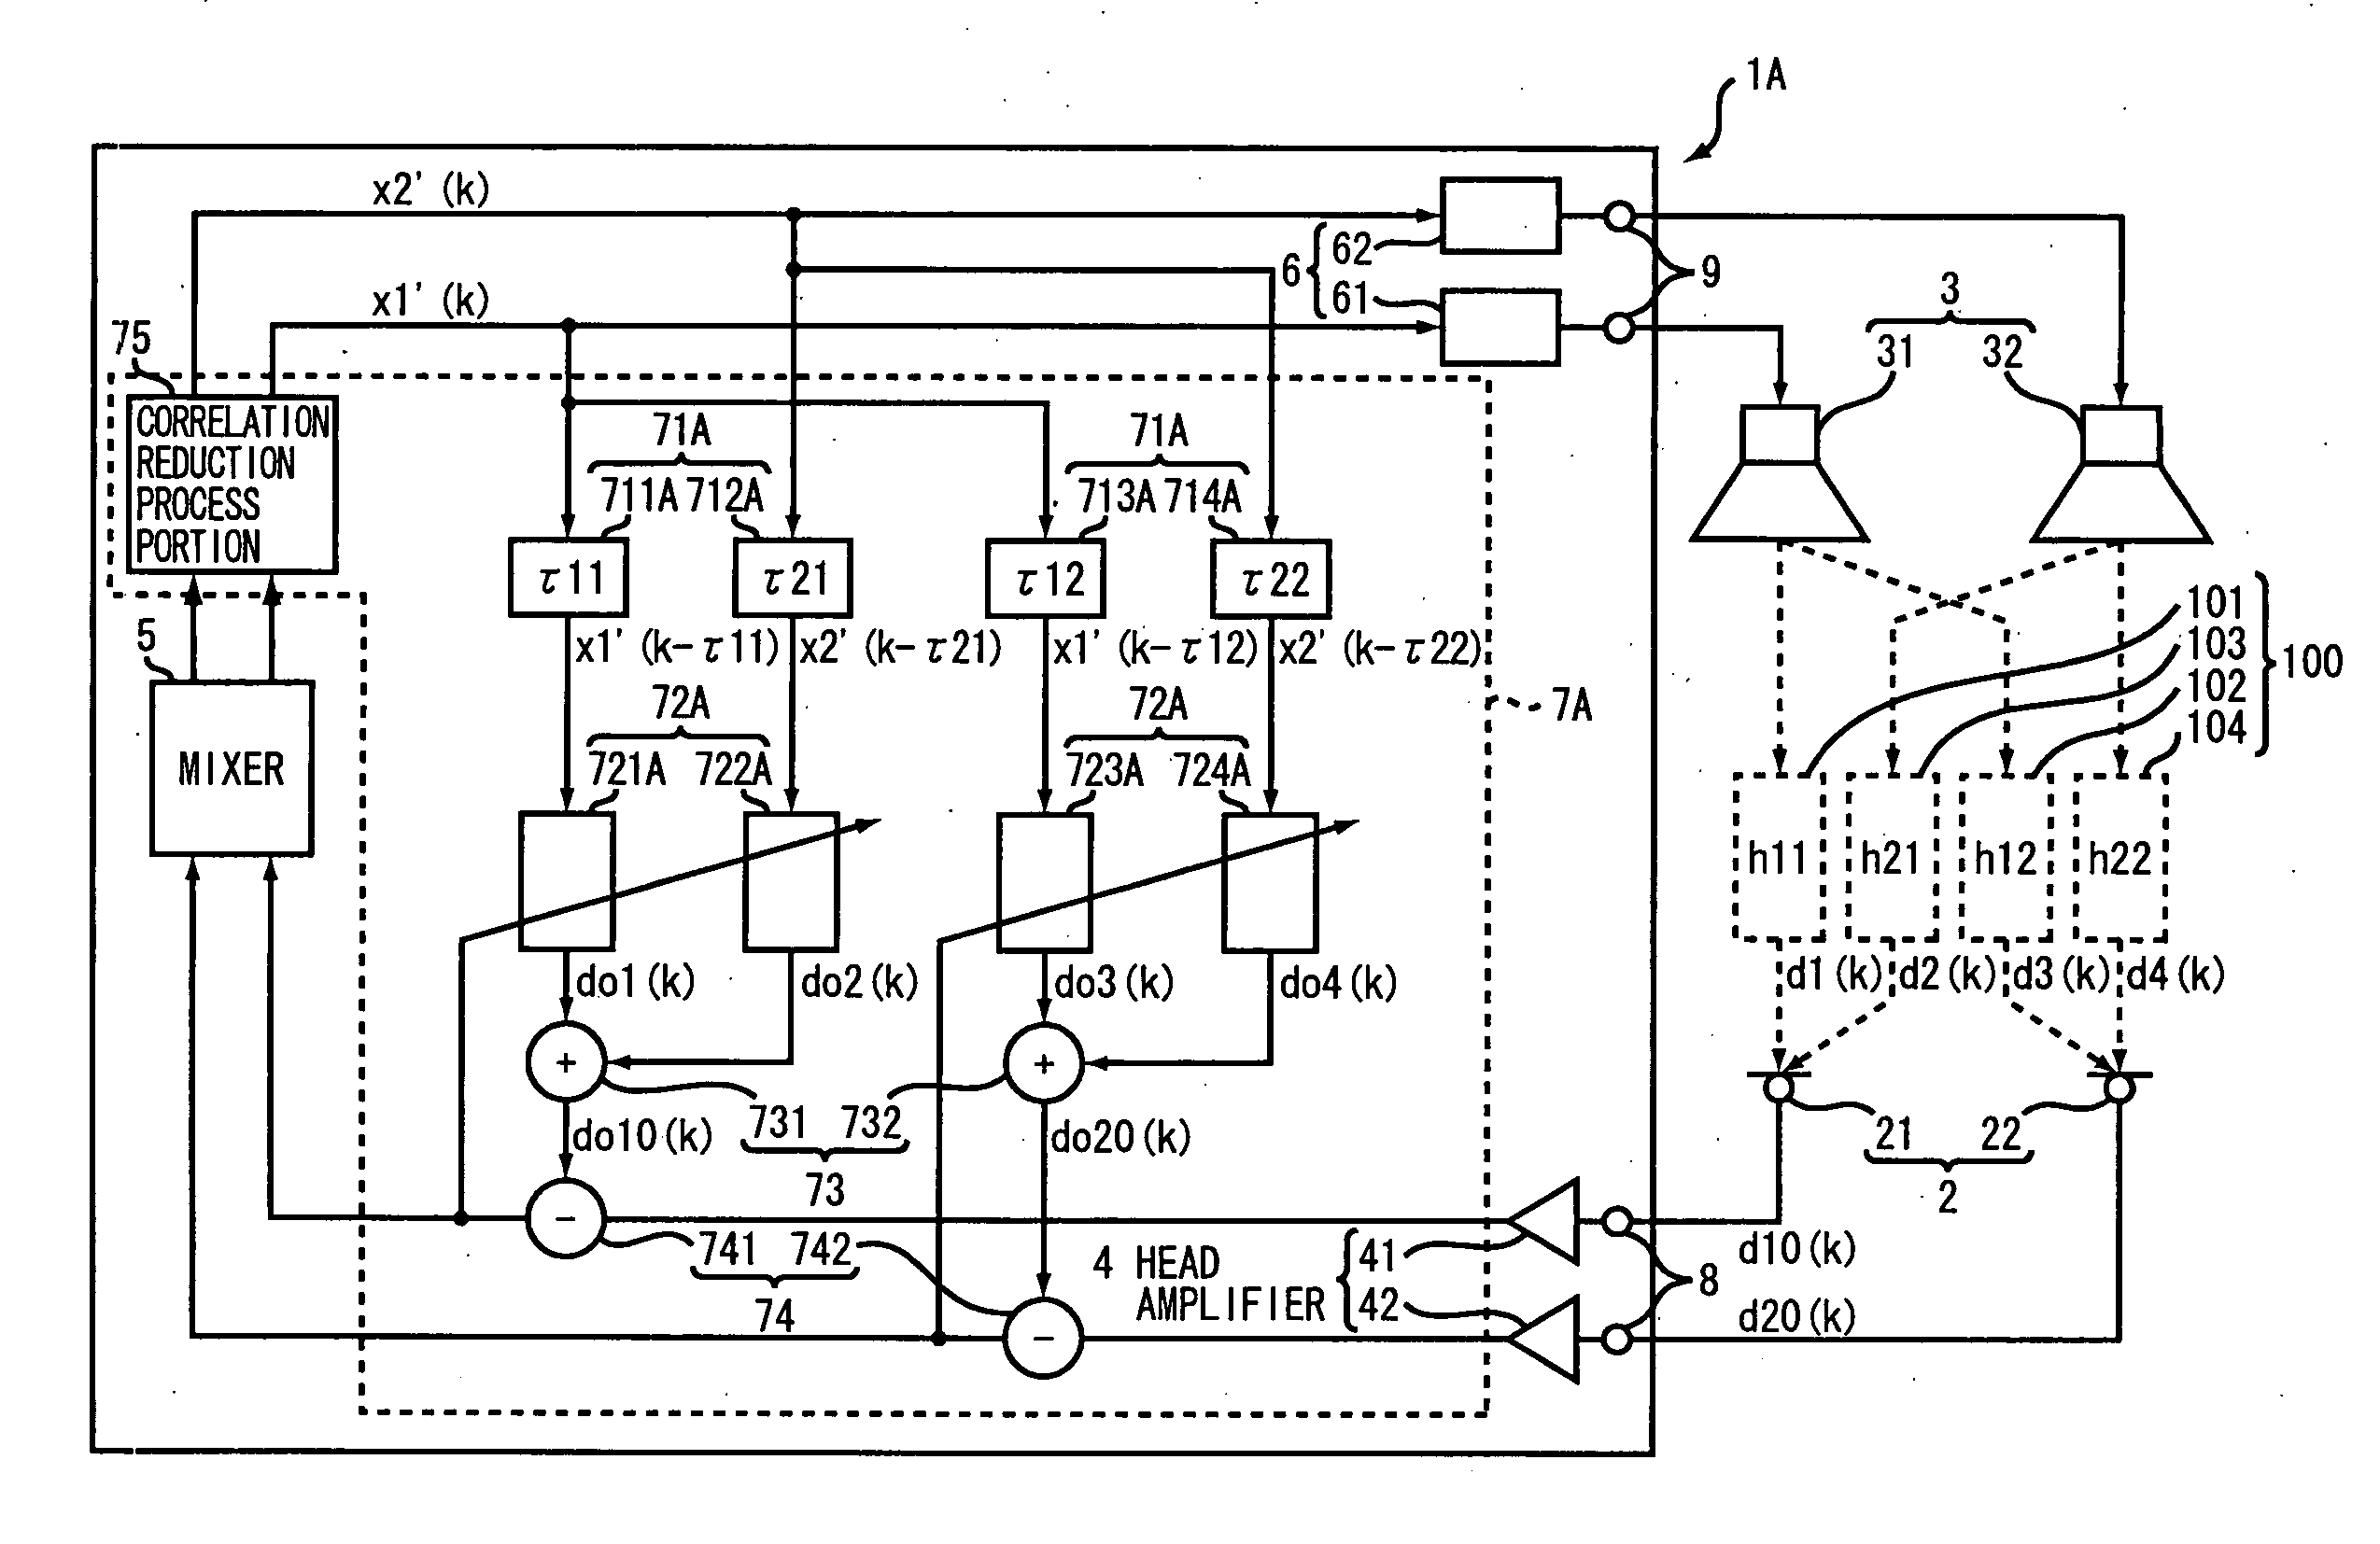 Howling canceler apparatus and sound amplification system